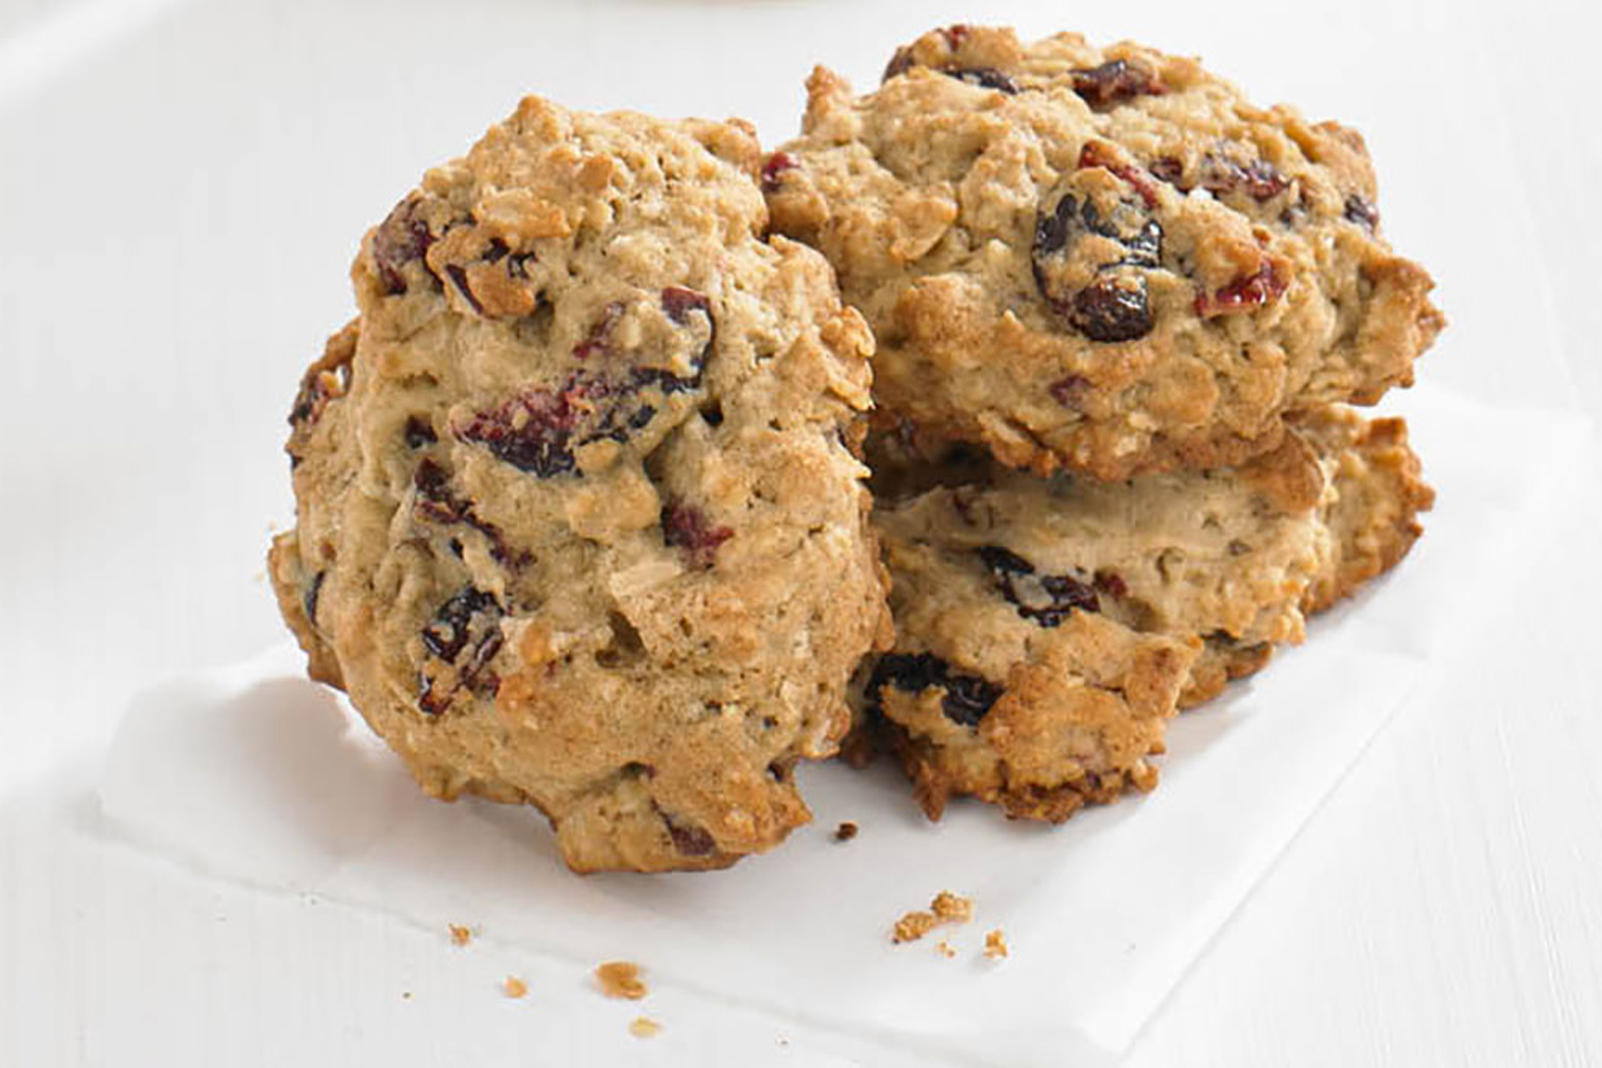 Cranberry Oatmeal Snack Cookies